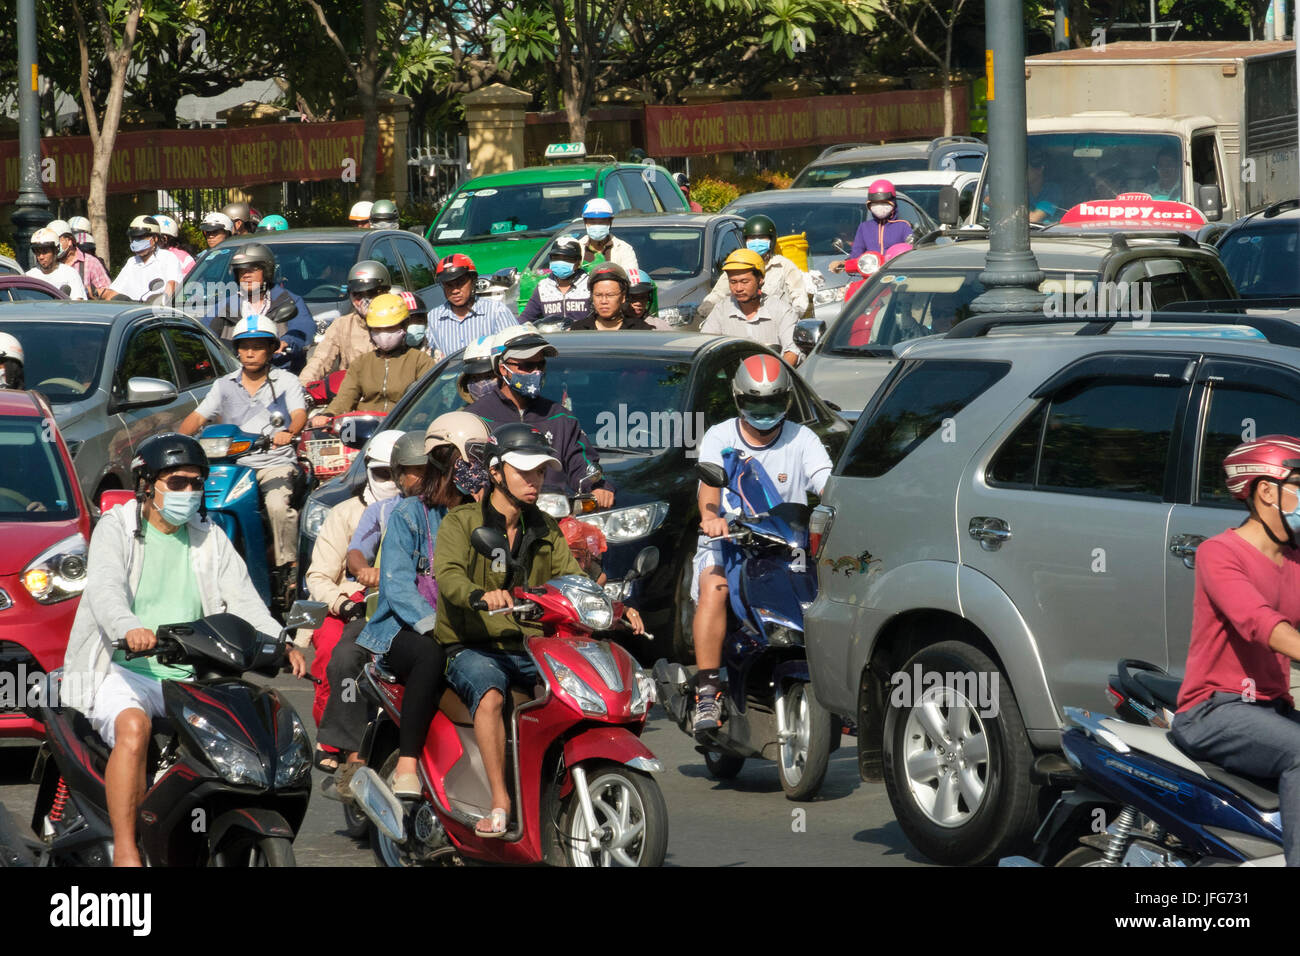 Thousands of scooters during rush hour in Ho Chi Minh city, Vietnam, Asia Stock Photo